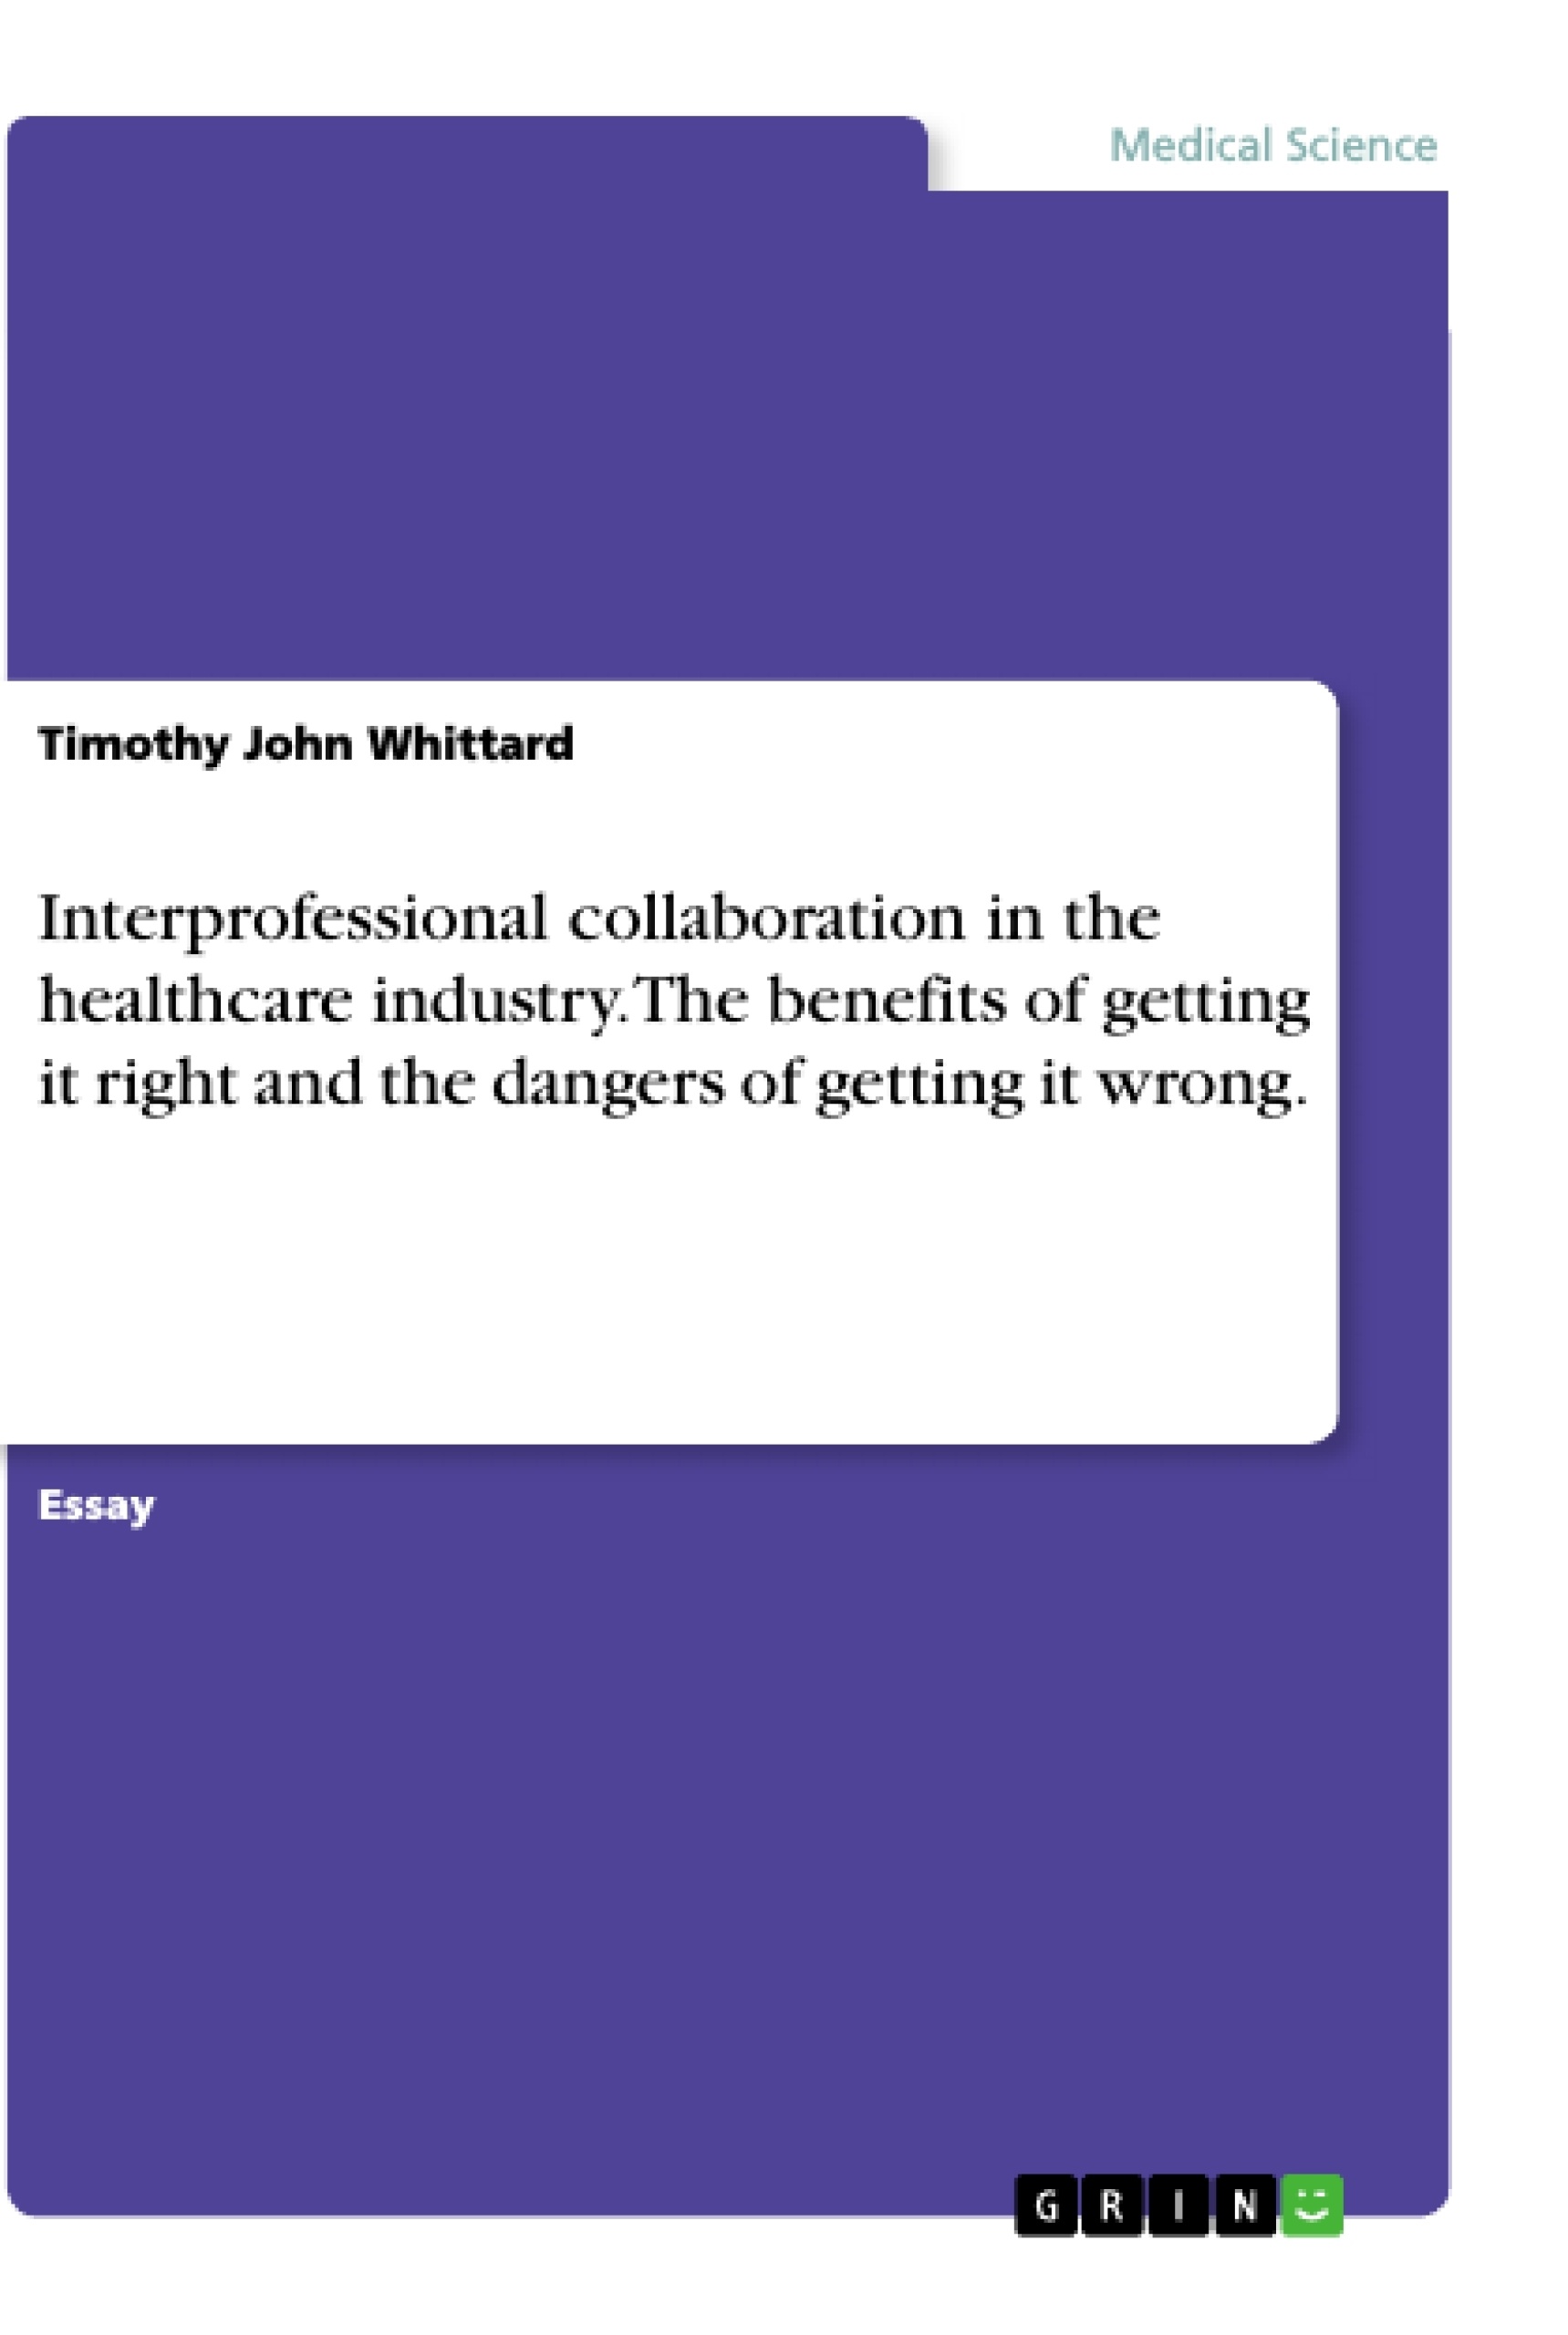 Titel: Interprofessional collaboration in the healthcare industry. The benefits of getting it right and the dangers of getting it wrong.